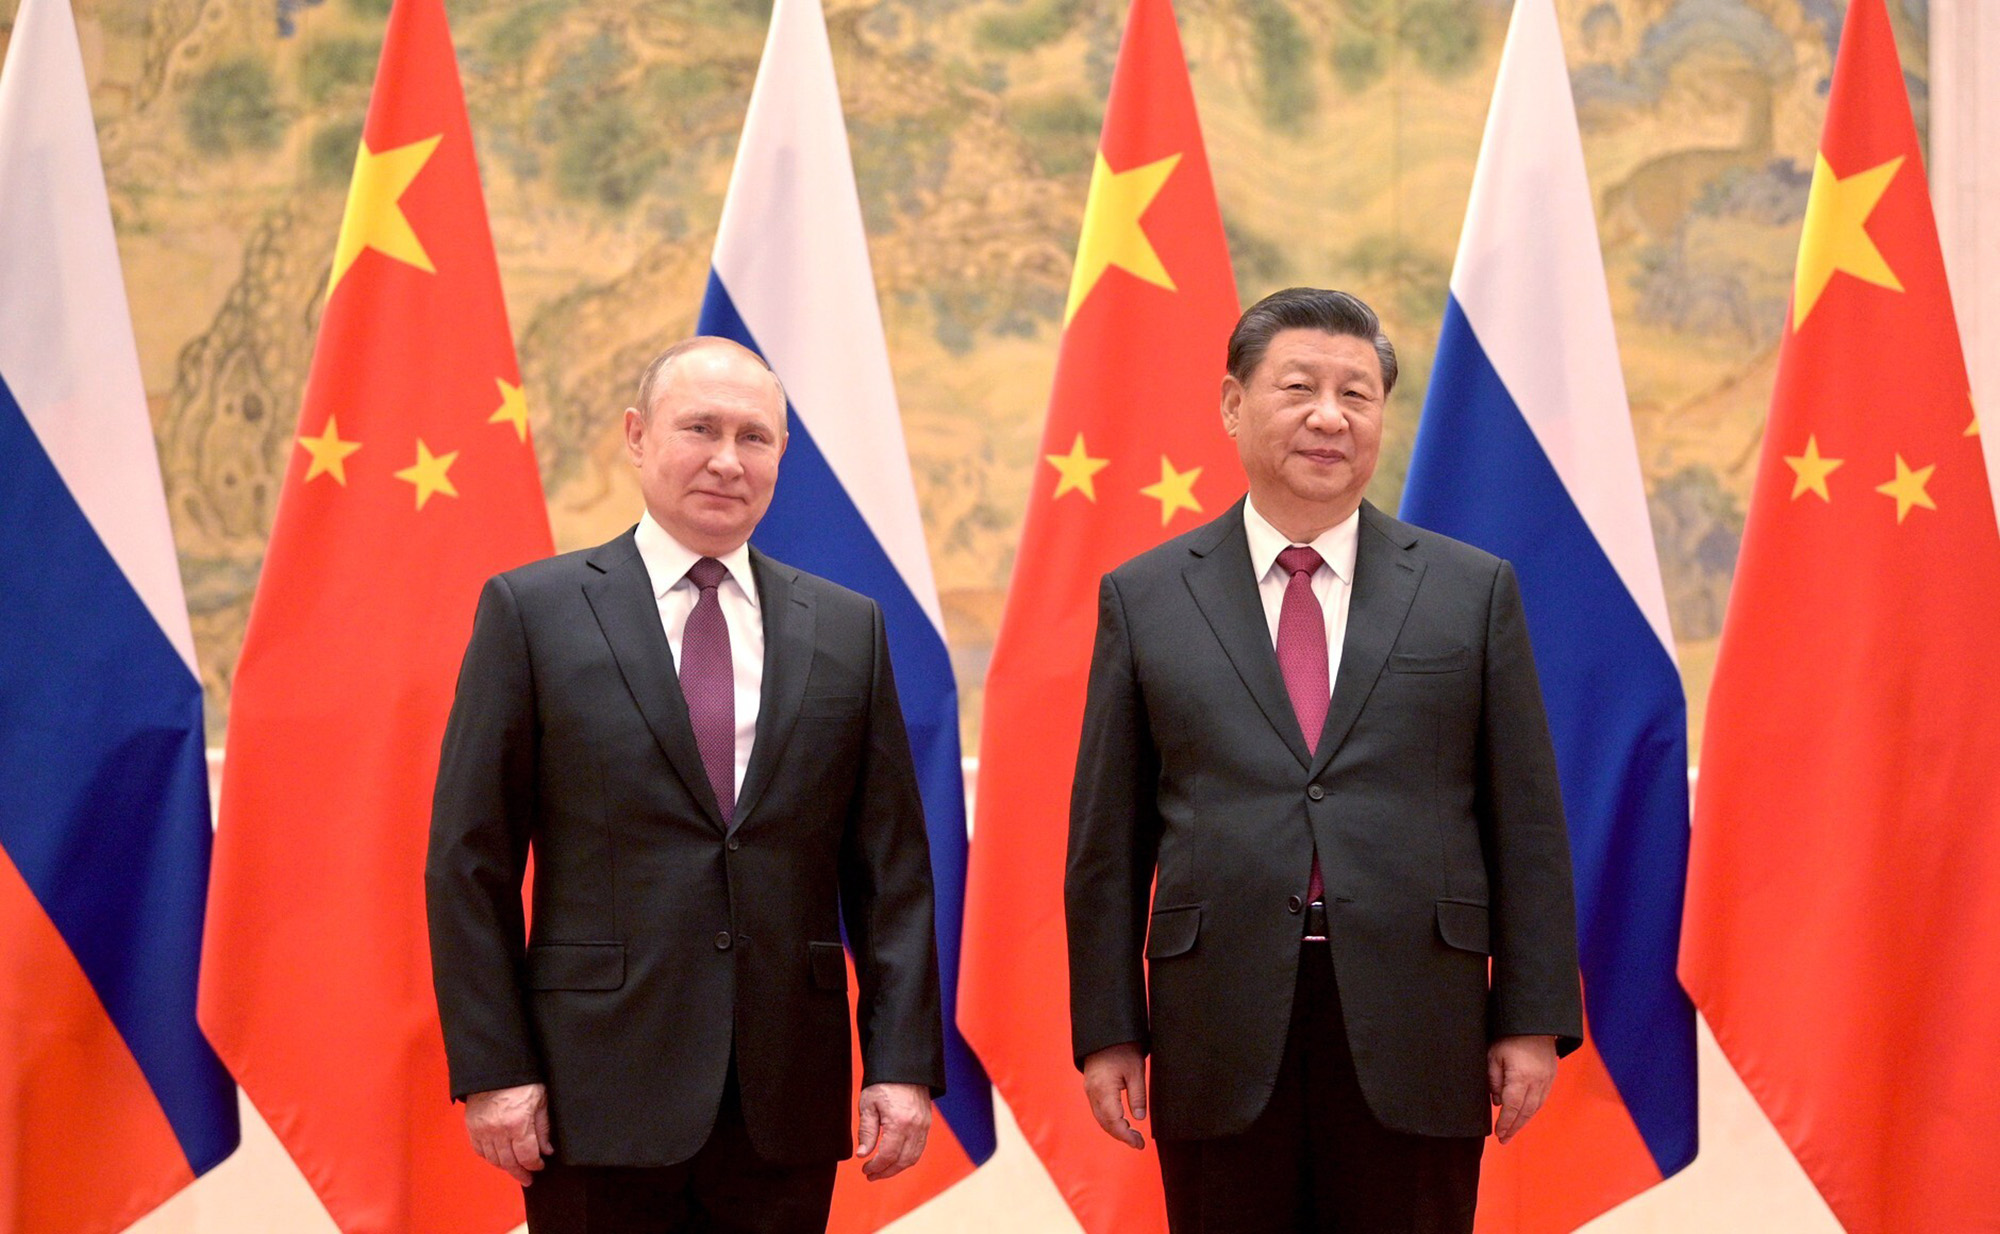 Russian President Vladimir Putin and Chinese leader Xi Jinping meet in Beijing on February 4, 2022.  